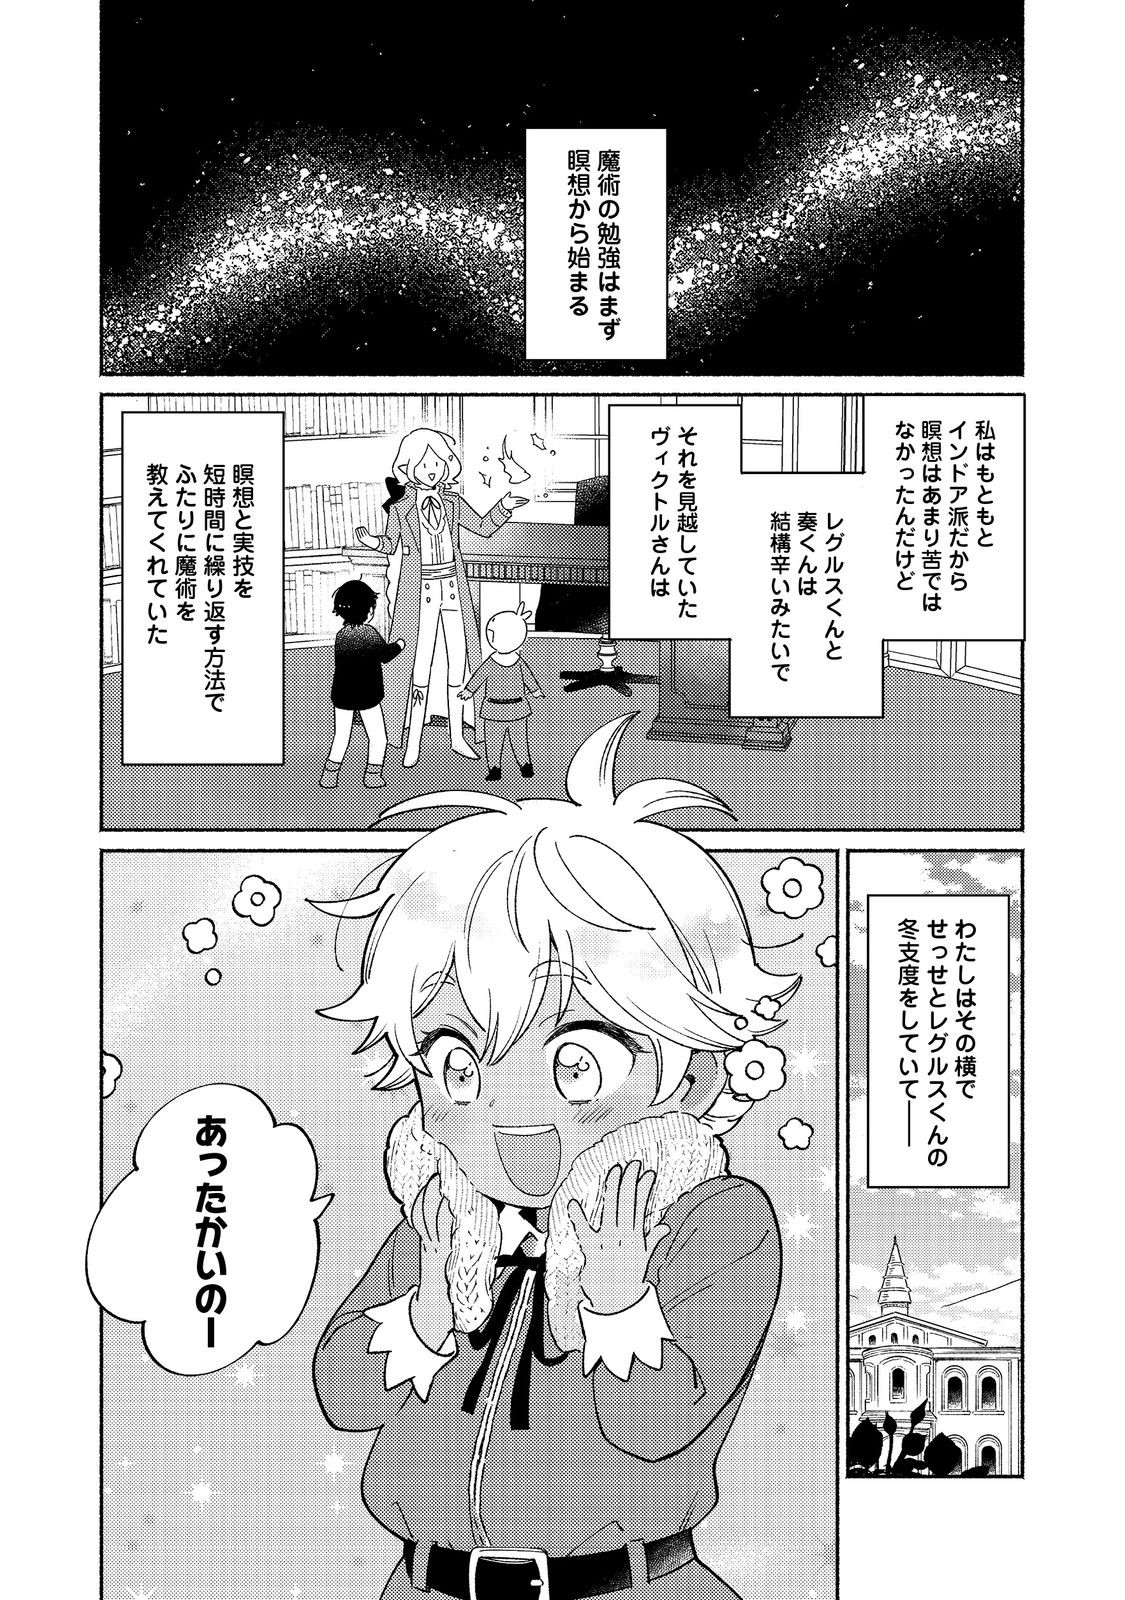 I’m the White Pig Nobleman 第19.1話 - Page 2